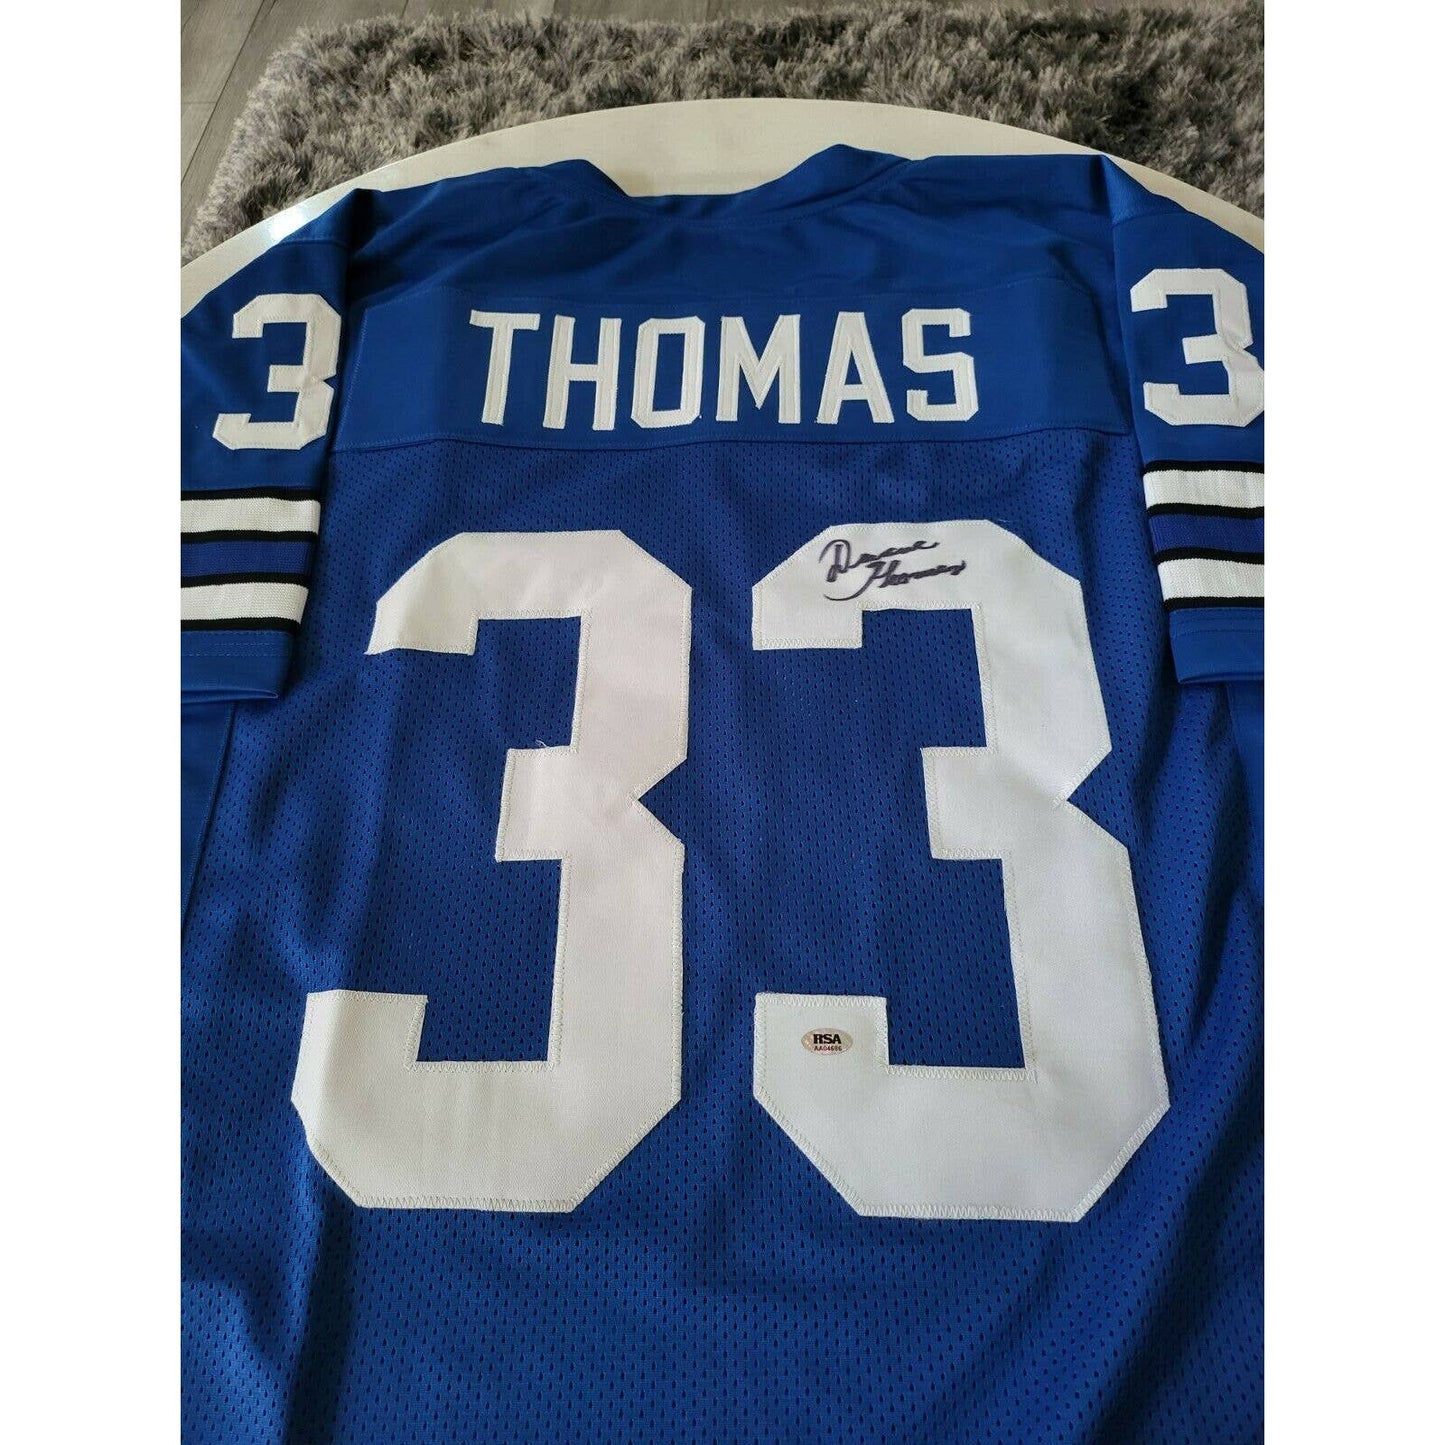 Duane Thomas Autographed/Signed Jersey Sticker Dallas Cowboys - TreasuresEvolved